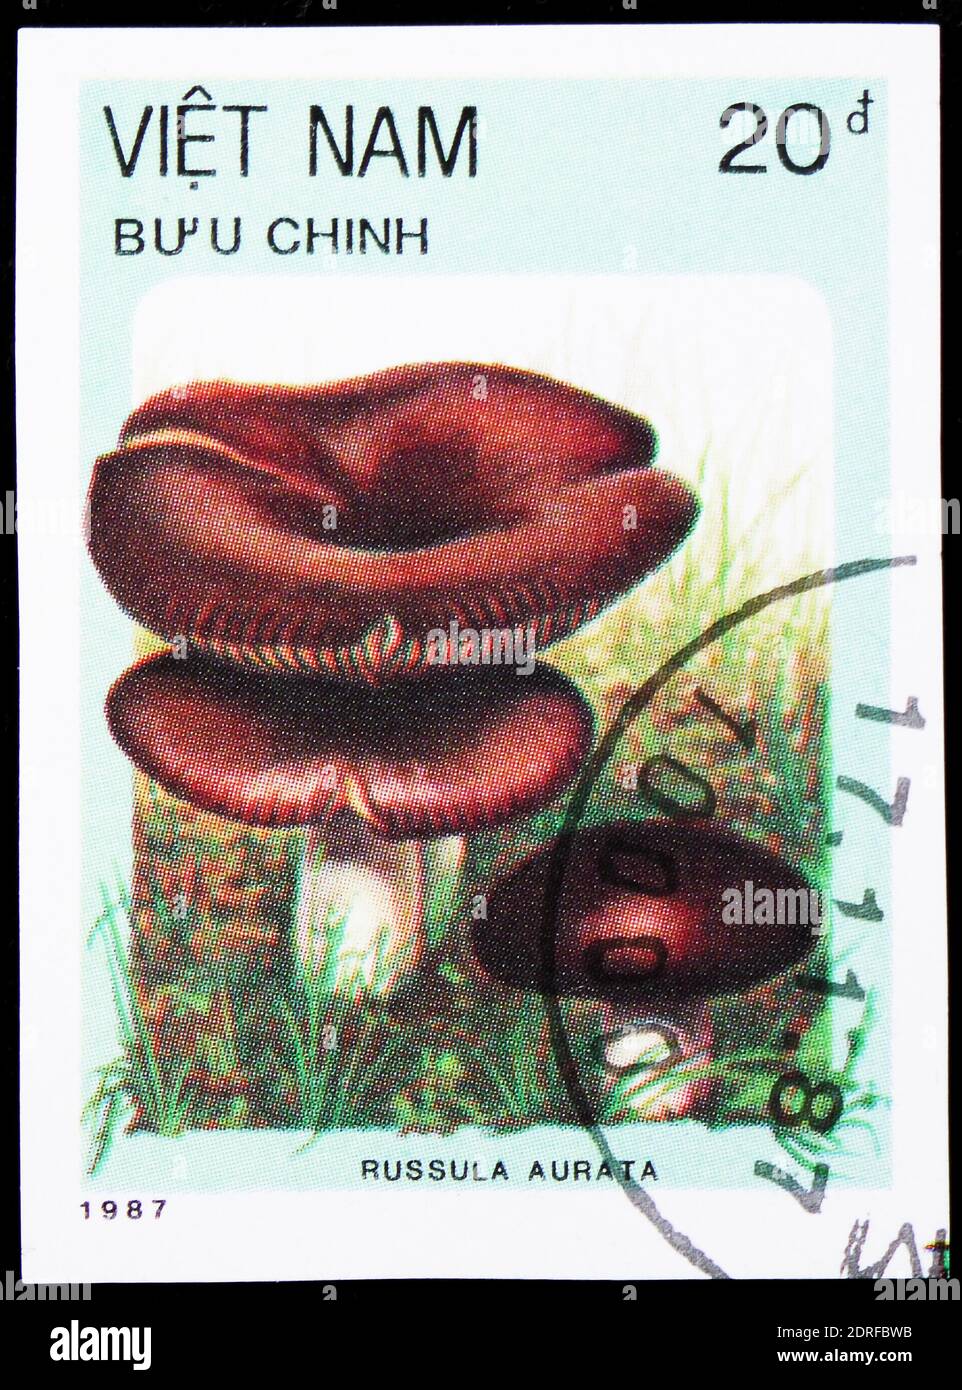 MOSCOW, RUSSIA - JANUARY 4, 2019: A stamp printed in Vietnam shows Russula aurata, Mushrooms serie, circa 1987 Stock Photo